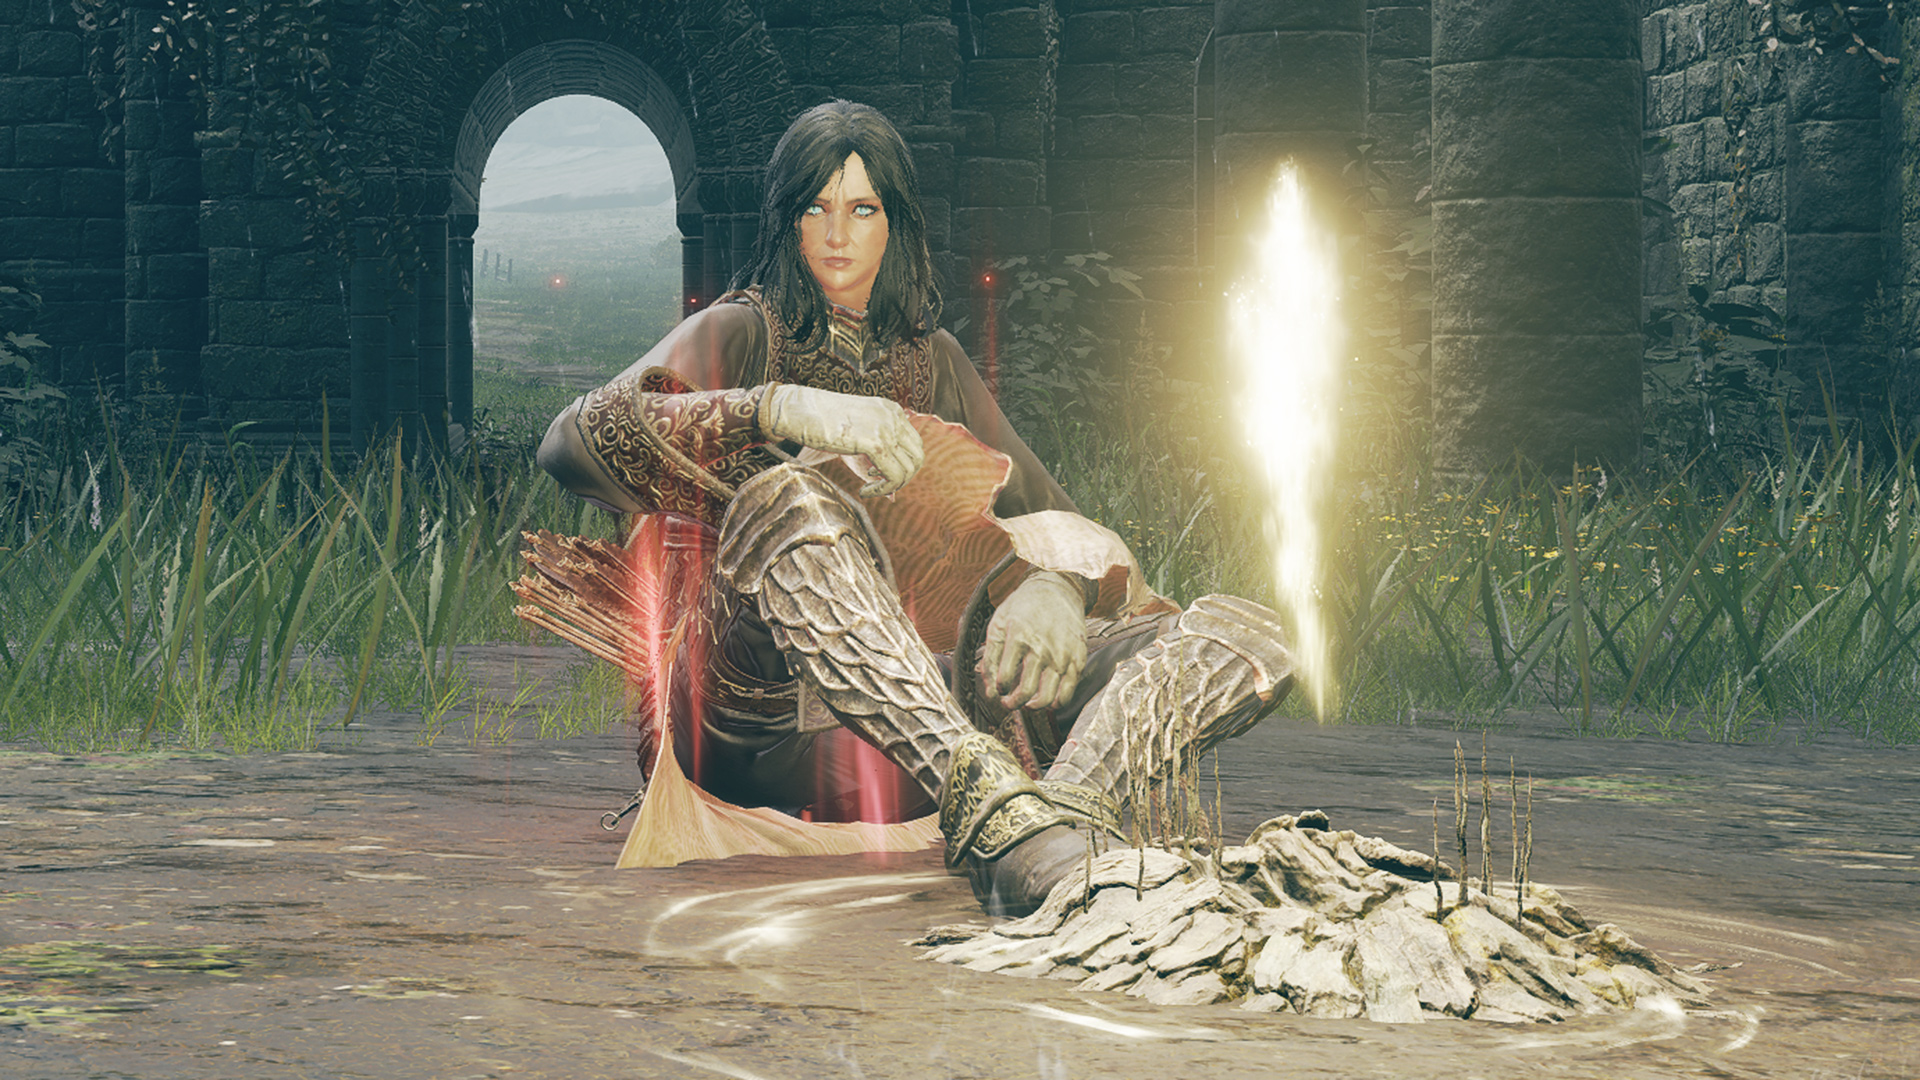 Elden Ring player character sitting in front of Site of Grace